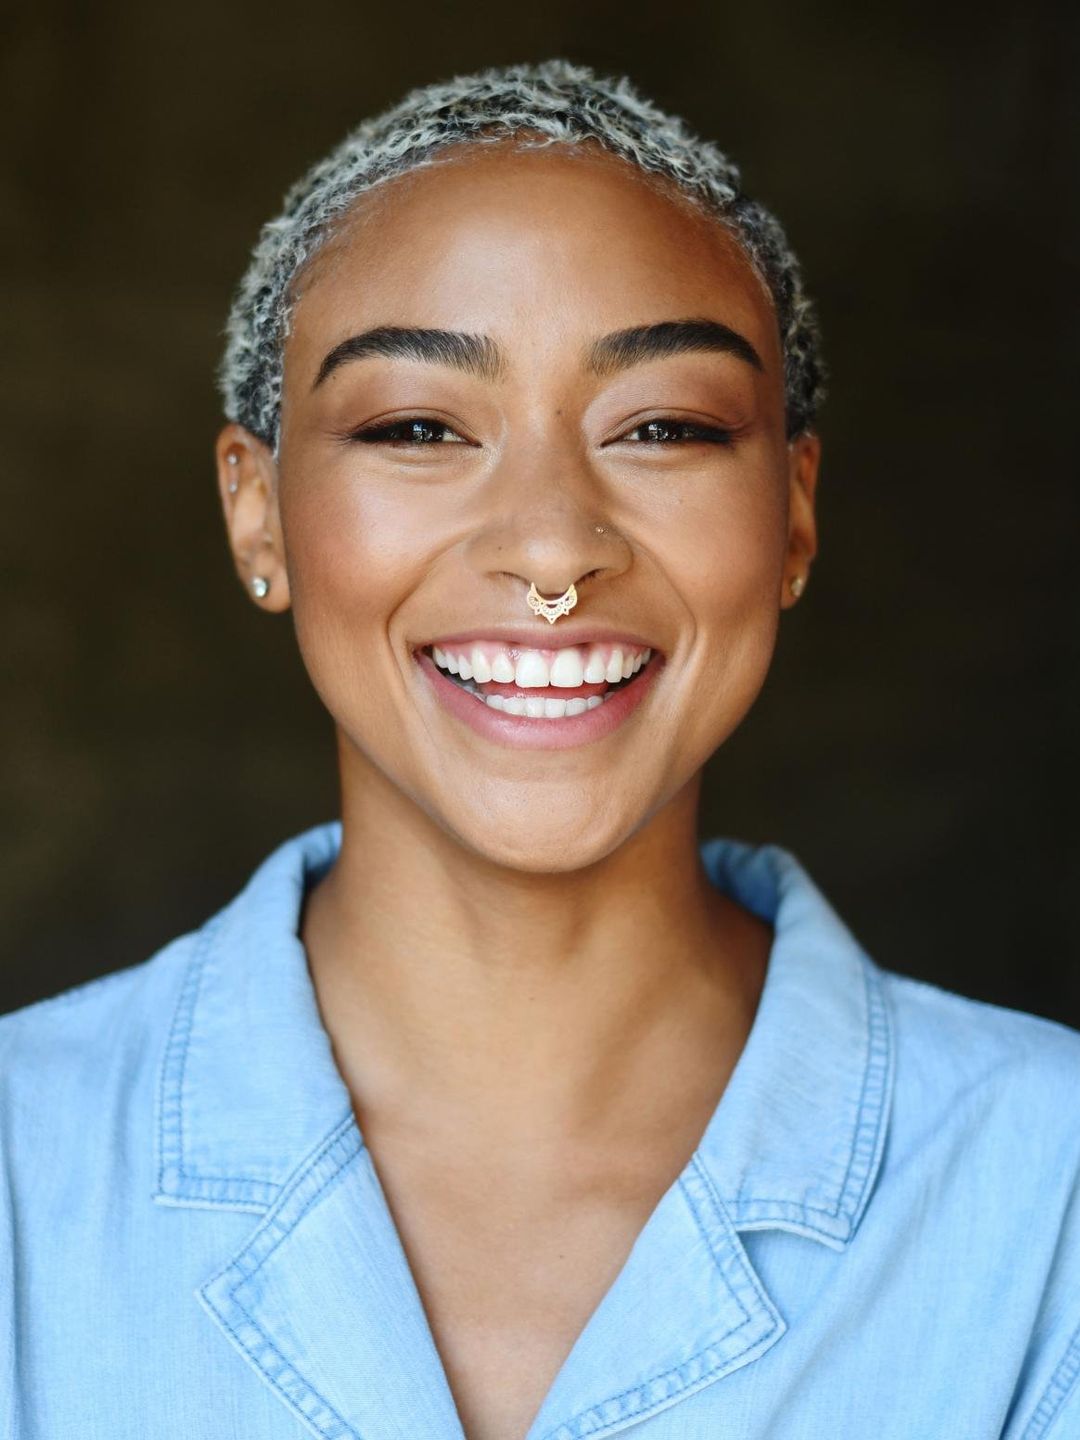 Tati Gabrielle who are her parents